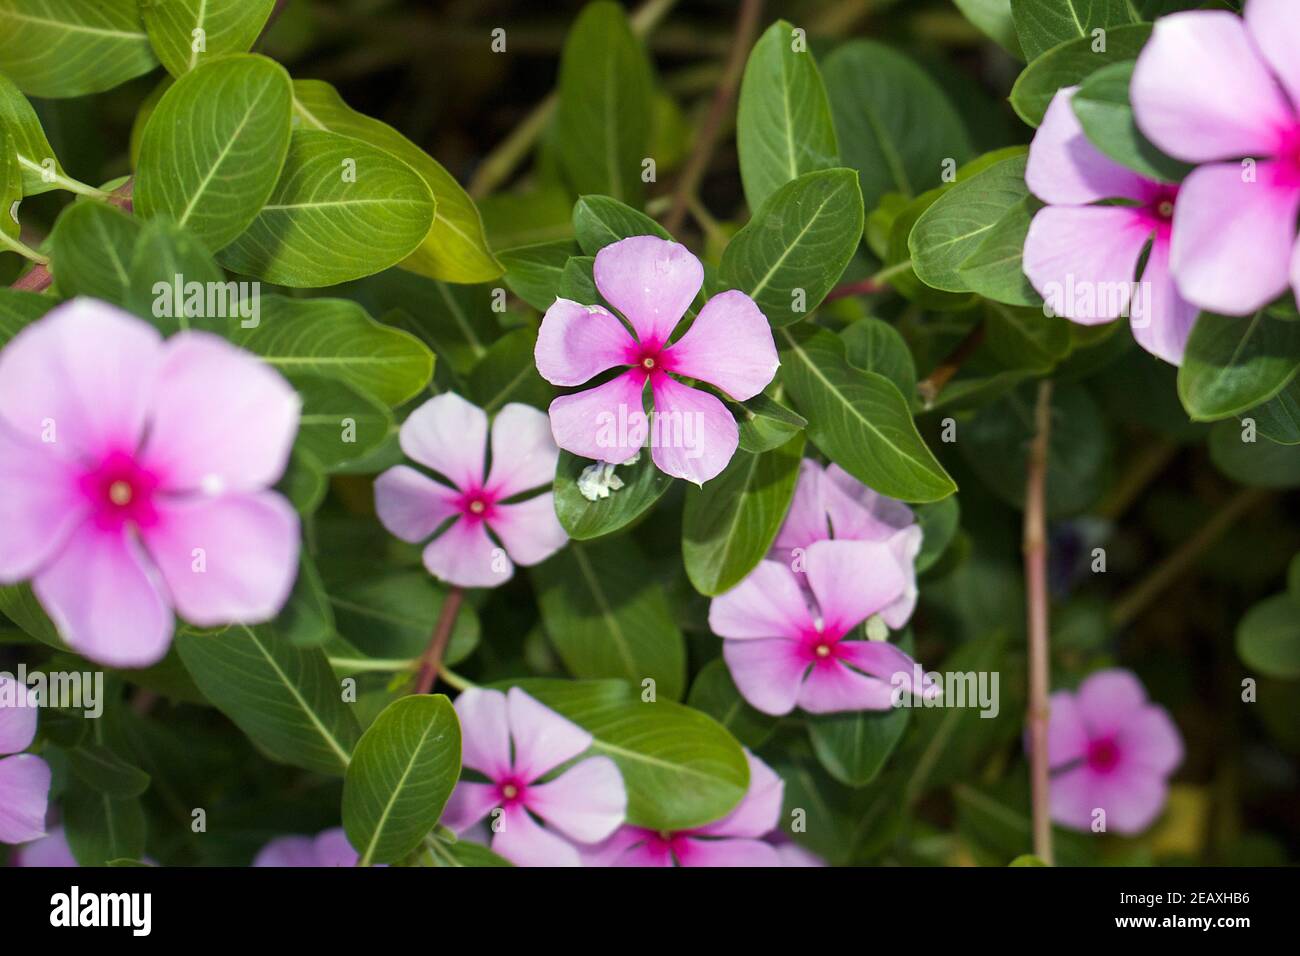 Catharanthus roseus flowers, commonly known as bright eyes, Cape periwinkle, which is an ornamental and medicinal plant. Stock Photo